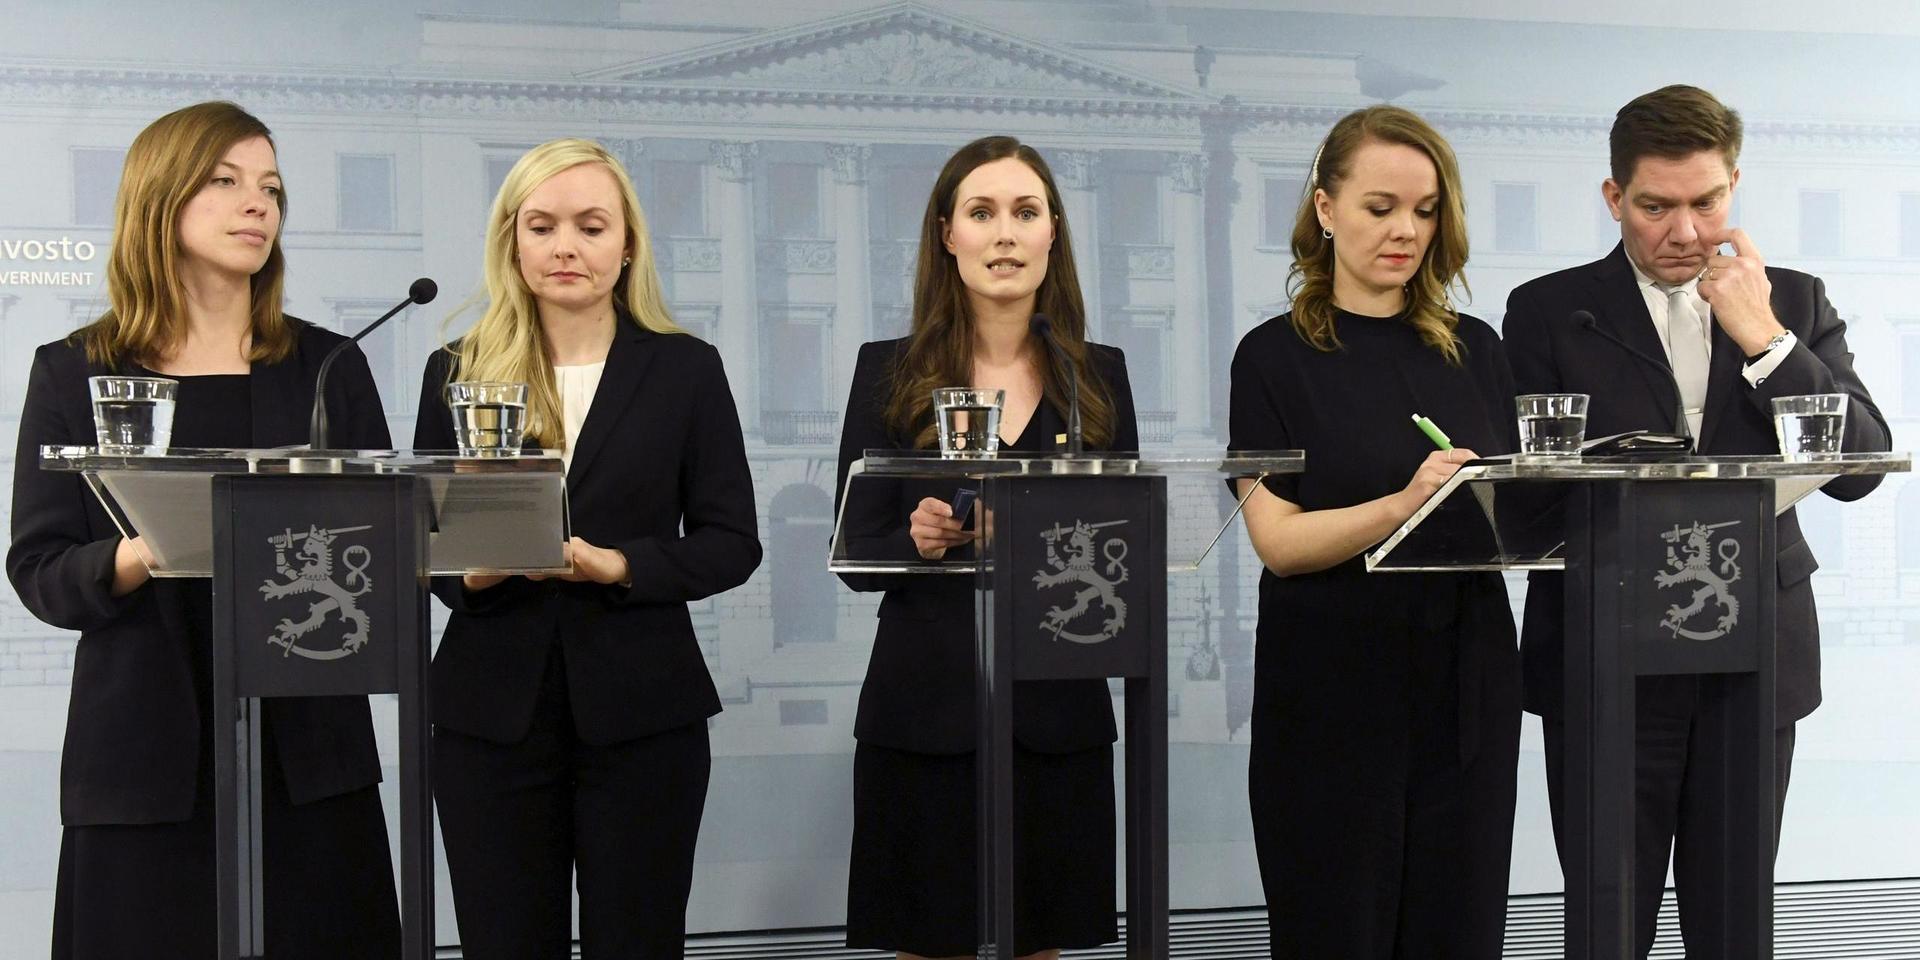 From left, Minister of Education Li Andersson, Minister of Interior Maria Ohisalo, Prime Minister Sanna Marin, Minister of Finance Katri Kulmuni and Minister for Nordic Cooperation and Equality Thomas Blomqvist during a press conference of the new Finnish government in Helsinki, Finland, on Tuesday, Dec. 10, 2019. Finland’s parliament chose Sanna Marin as the country's new prime minister Tuesday, making the 34-year-old the world’s youngest sitting head of government. (Vesa Moilanen/Lehtikuva via AP)  WRC832